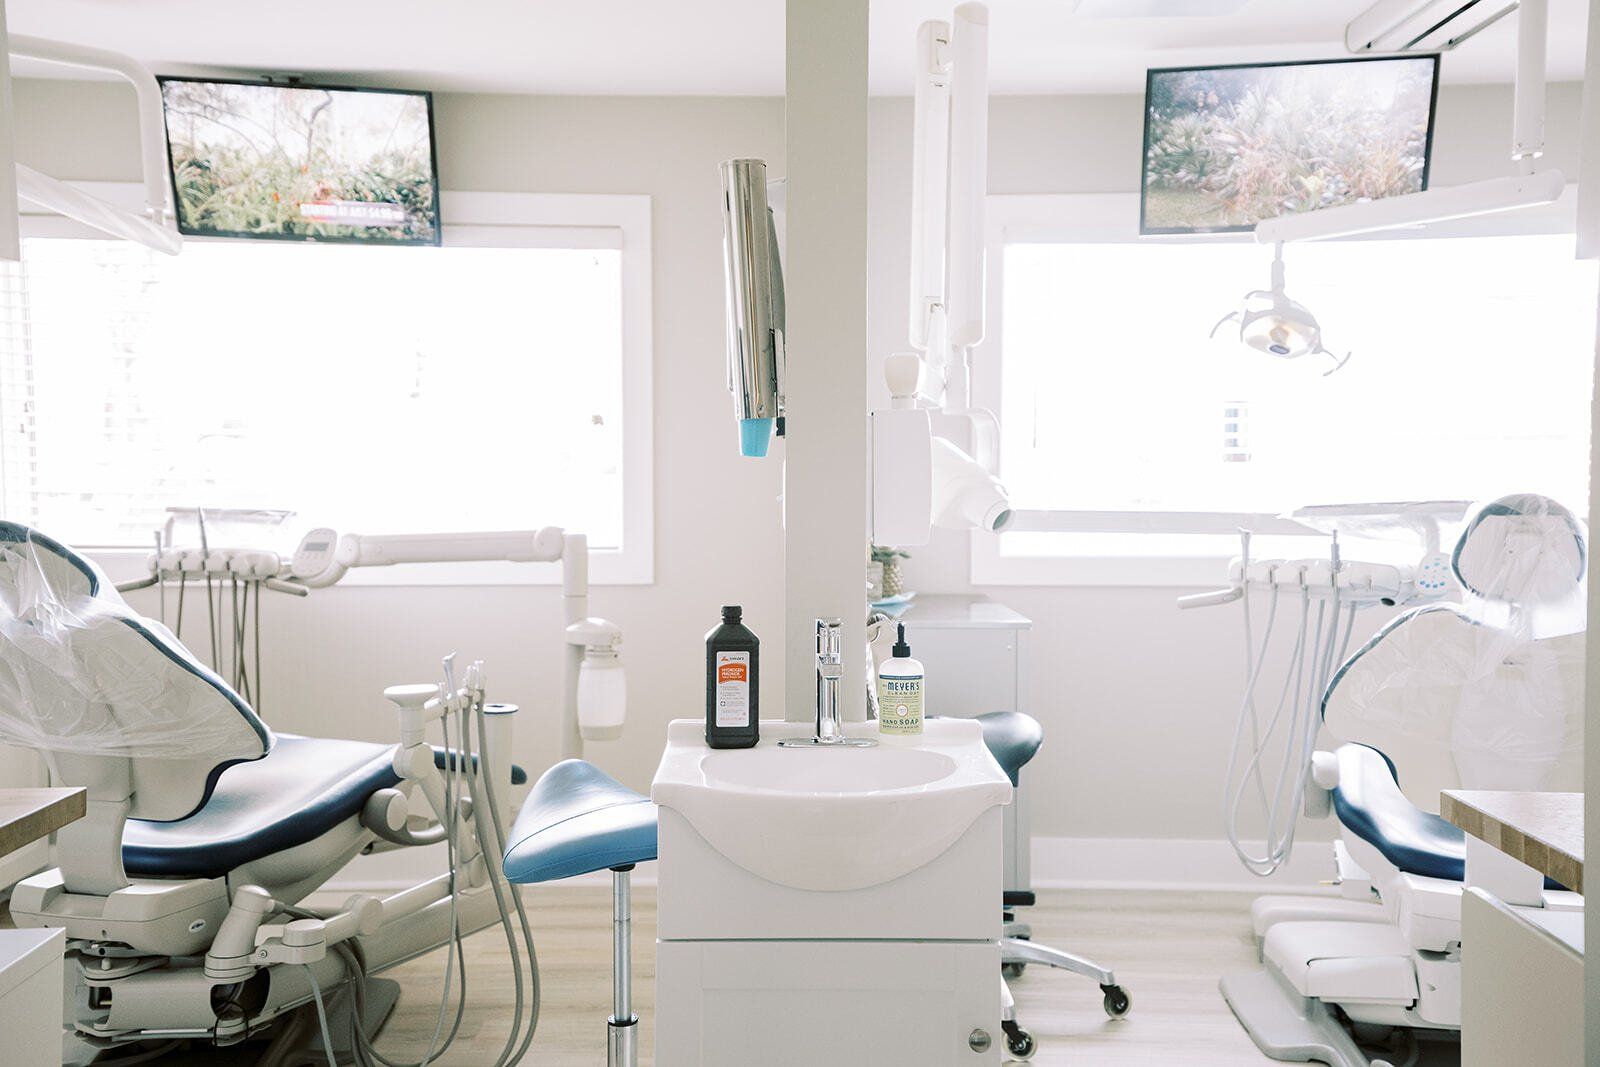 televisions-at-dentist-office